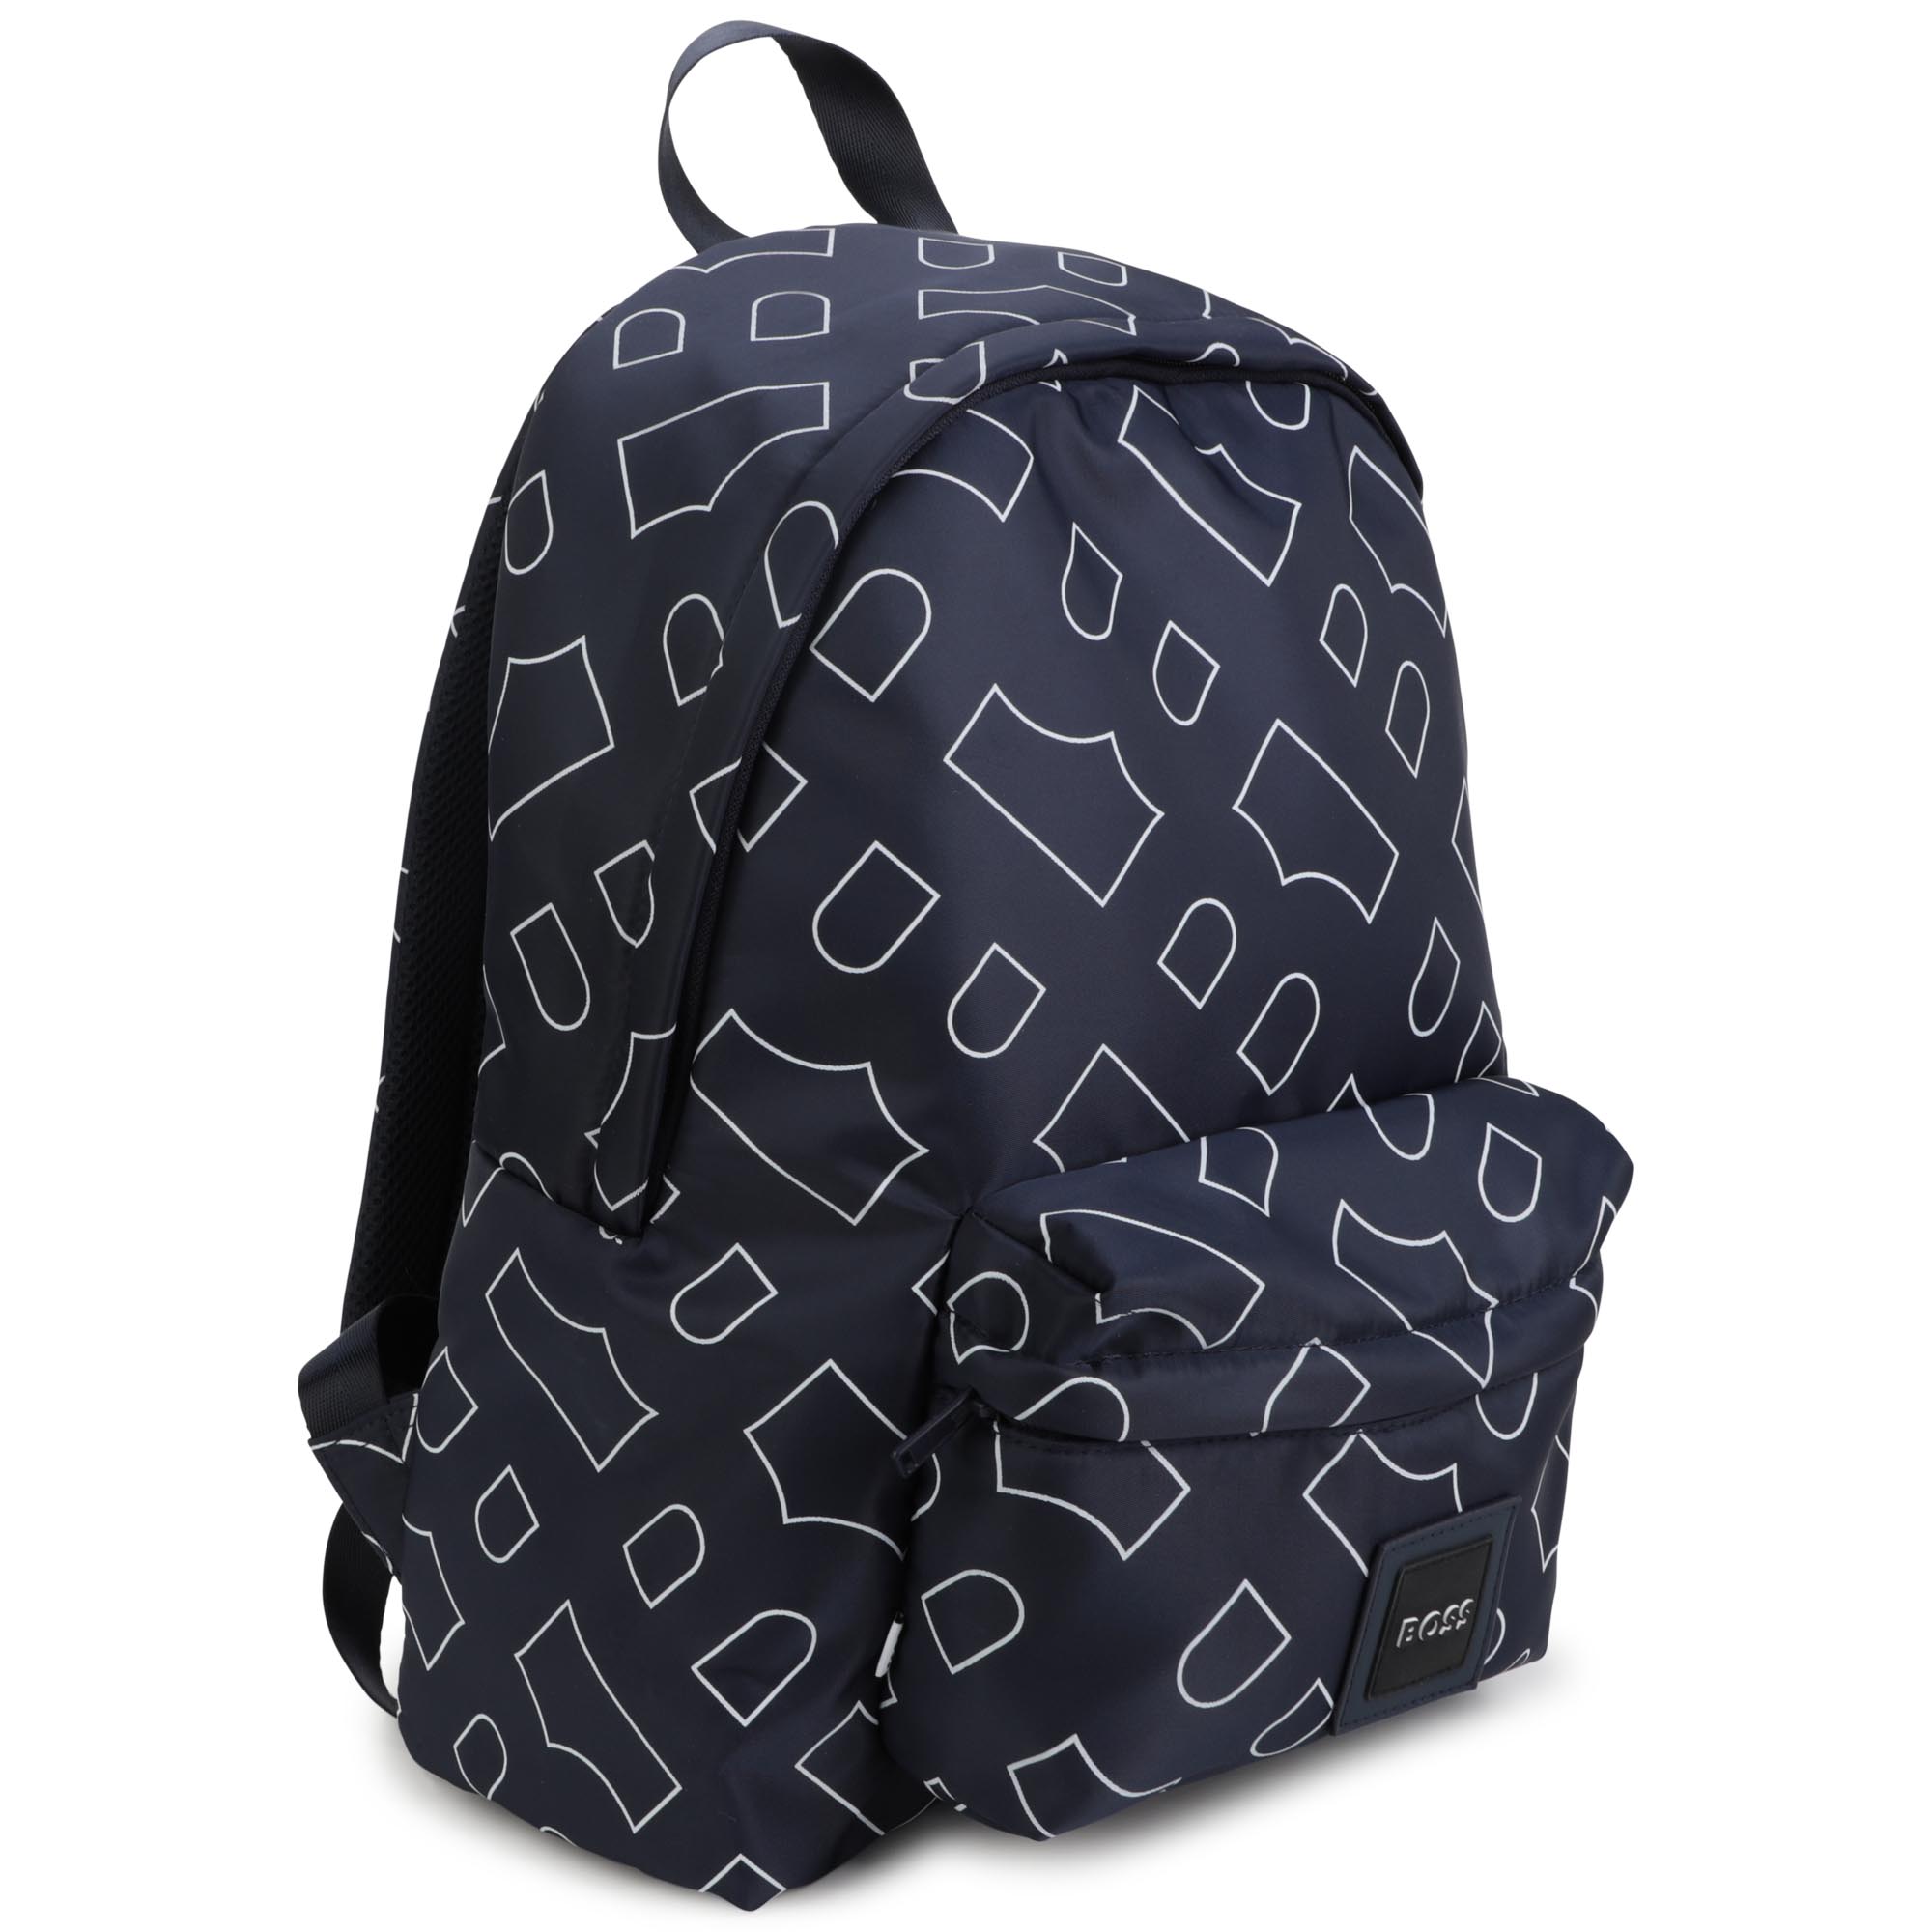 Canvas backpack BOSS for BOY